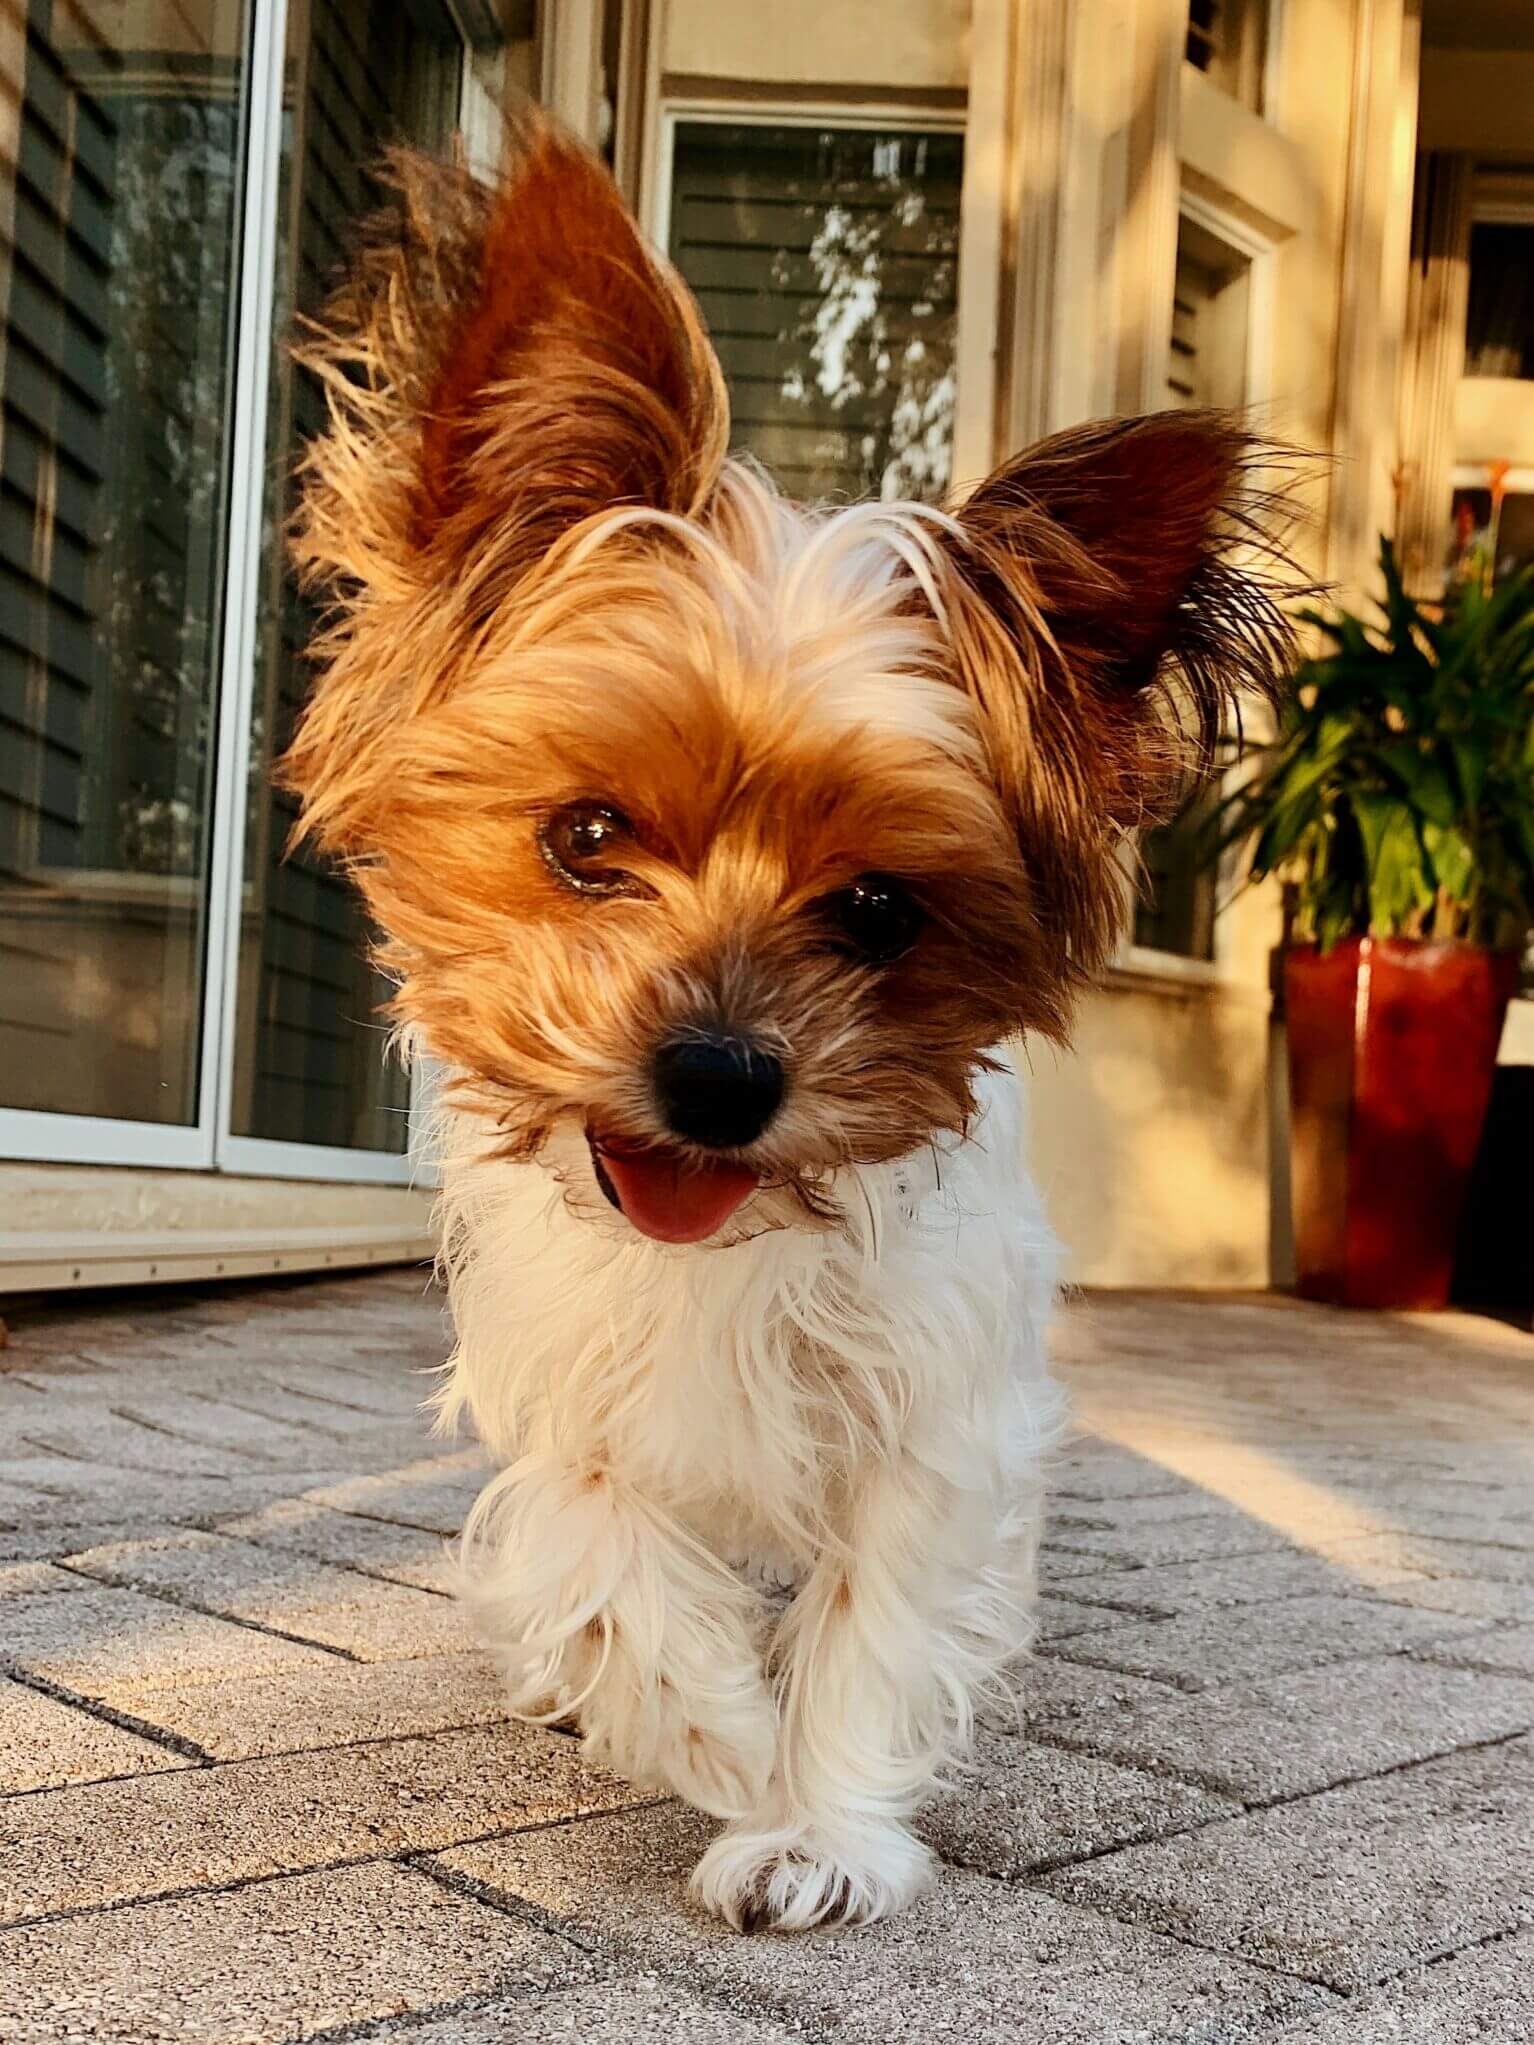 Small terrier walking on a patio, tongue hanging out.